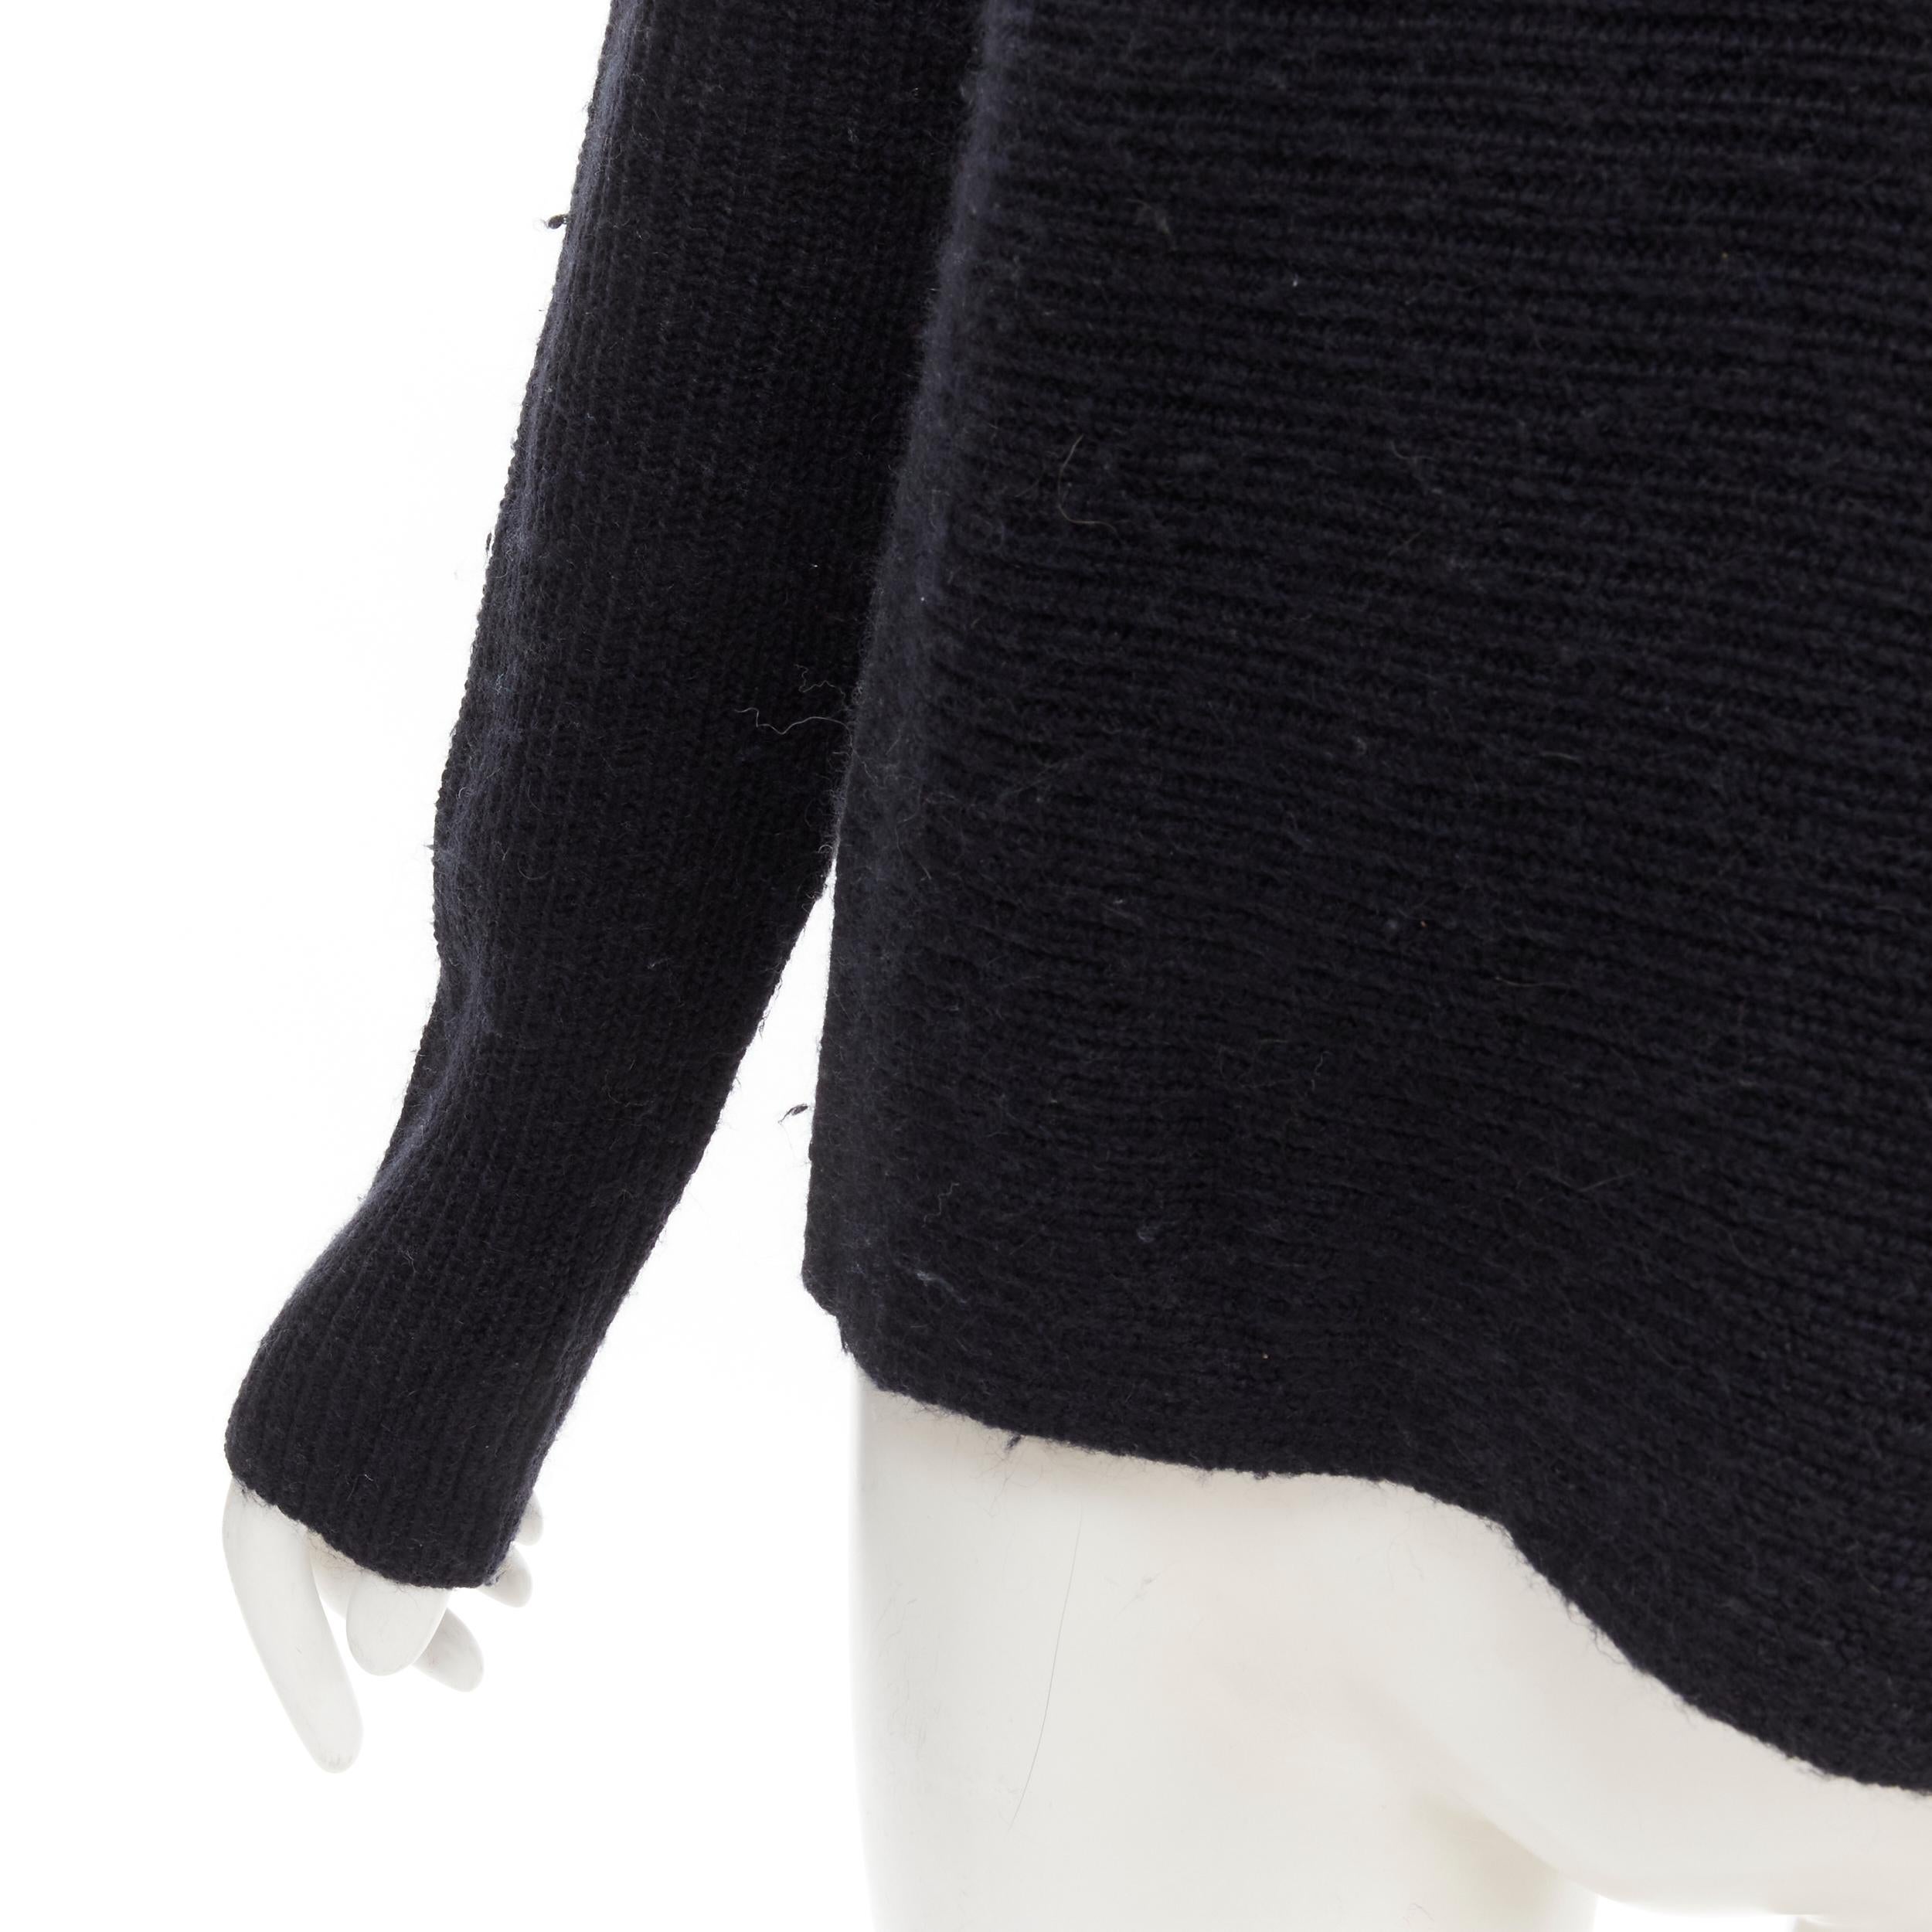 VINCE black merino wool blend boat wide boat neck high low sweater M
Brand: Vince
Material: Merino Wool
Color: Black
Pattern: Solid
Made in: China

CONDITION:
Condition: Excellent, this item was pre-owned and is in excellent condition. pilling on